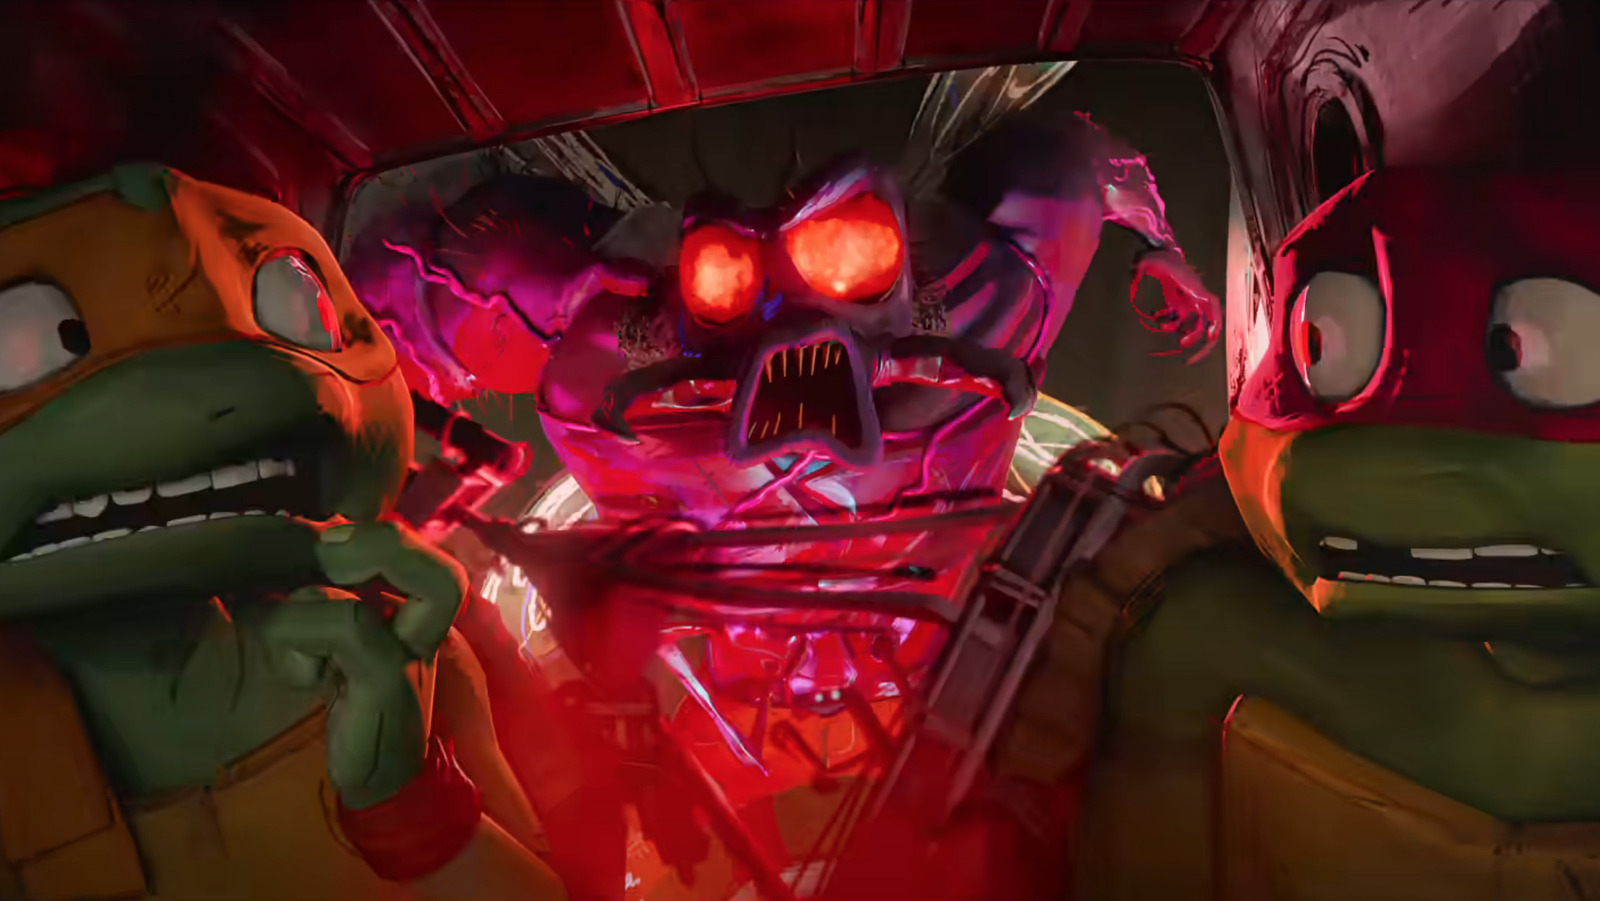 Who Are The Villains In TMNT: Mutant Mayhem?